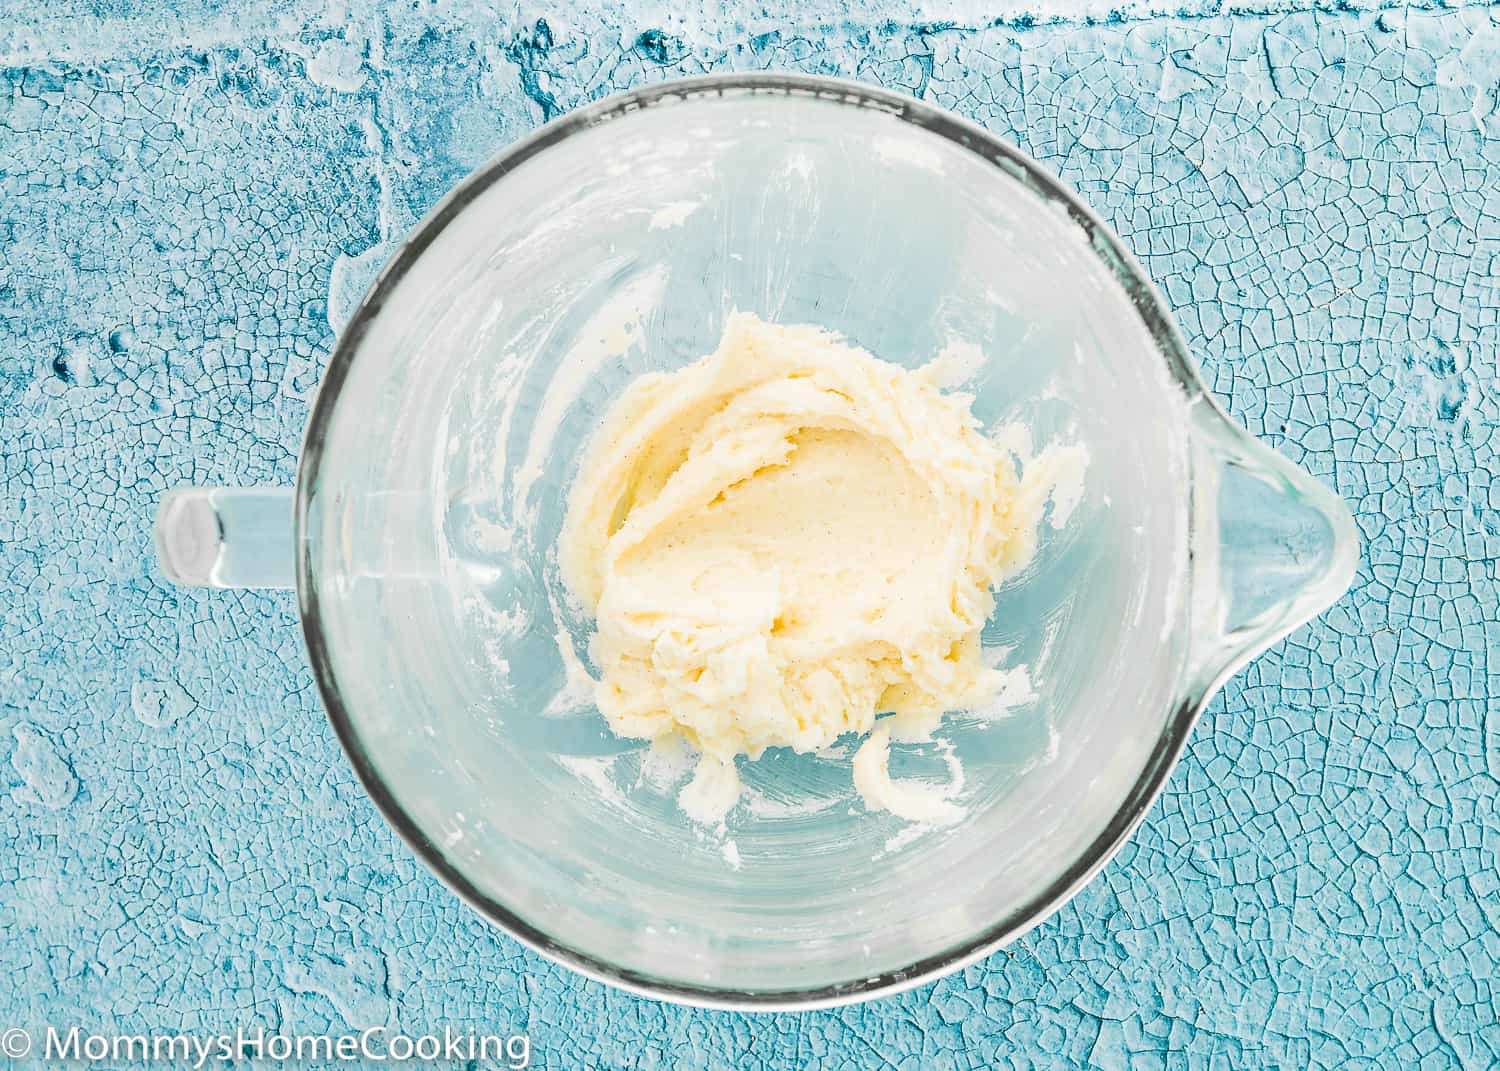 butter, sugar, and yogurt mix together in a glass bowl.